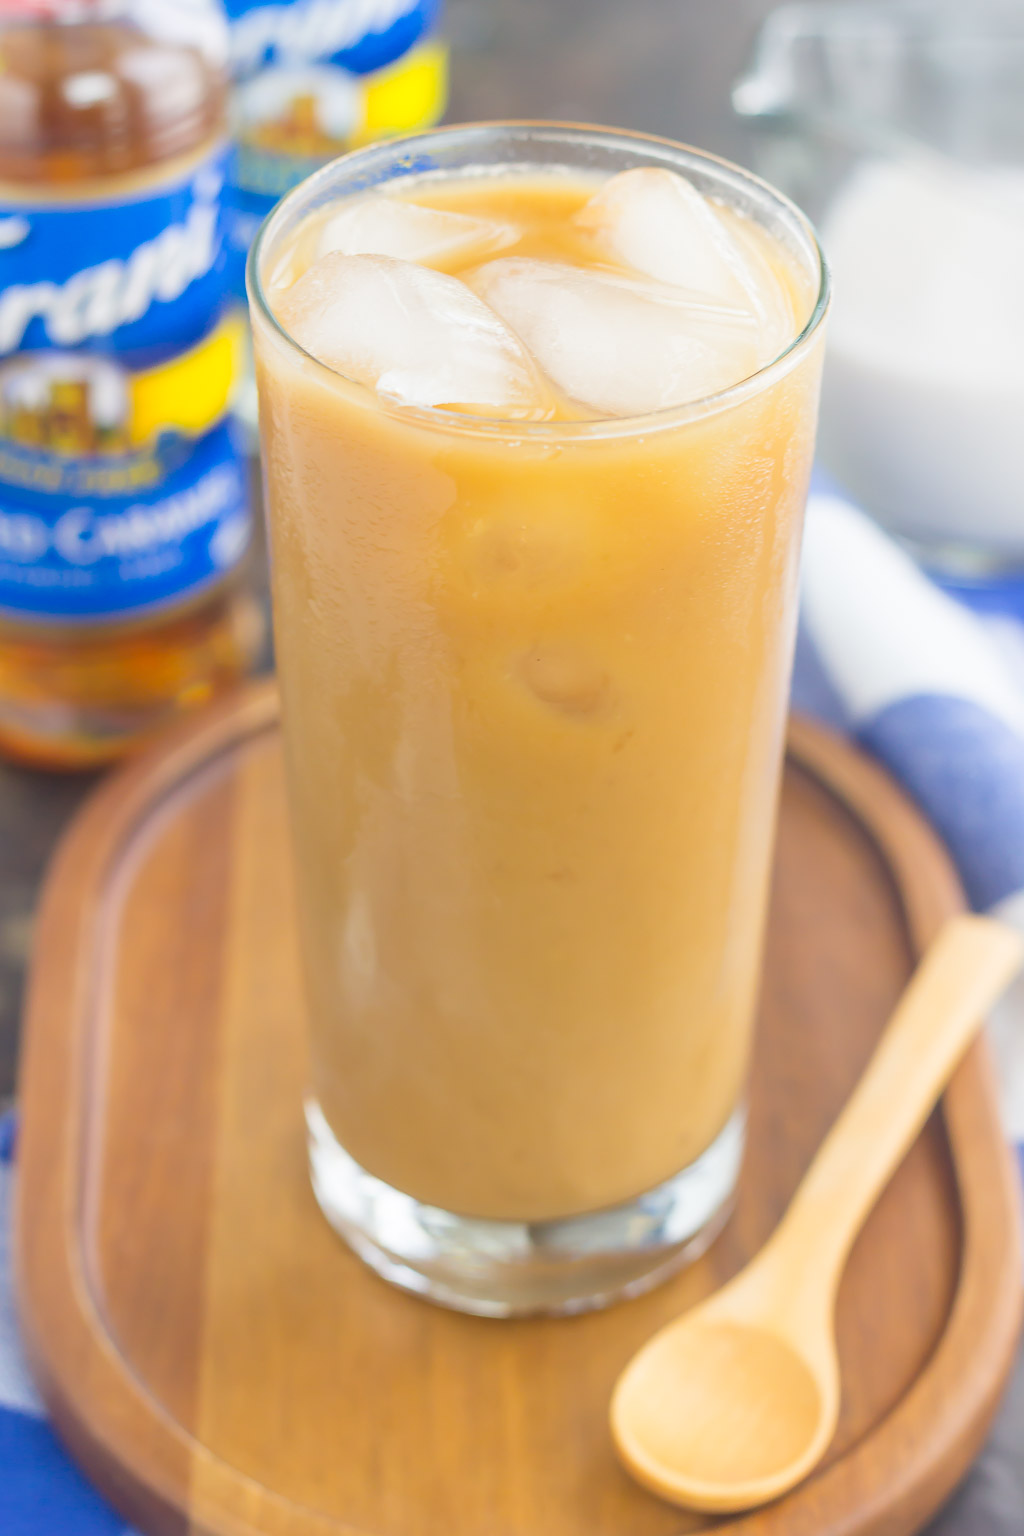 This Salted Caramel Almond Iced Coffee is an easy, three ingredient drink to beat the summer heat. Bold coffee is combined with almond milk and a hint of salted caramel syrup to create a smooth and decadent flavor. Ready in less than 5 minutes and perfect for just about any day, you'll be sipping on this sweet treat all year long!